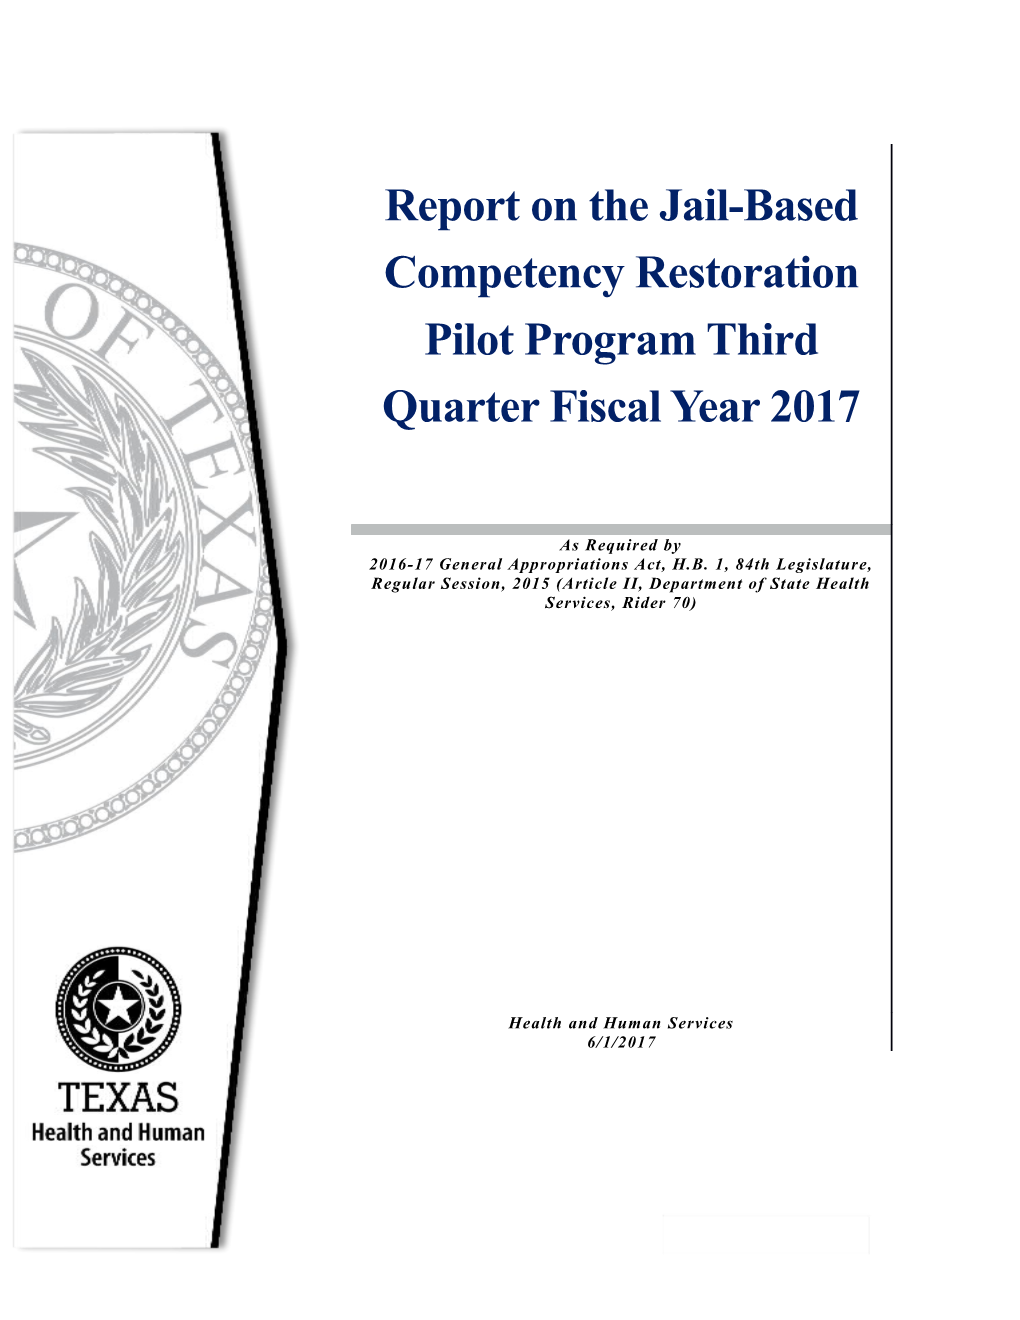 Report on the Jail-Based Competency Restoration Pilot Program Third Quarter Fiscal Year 2017